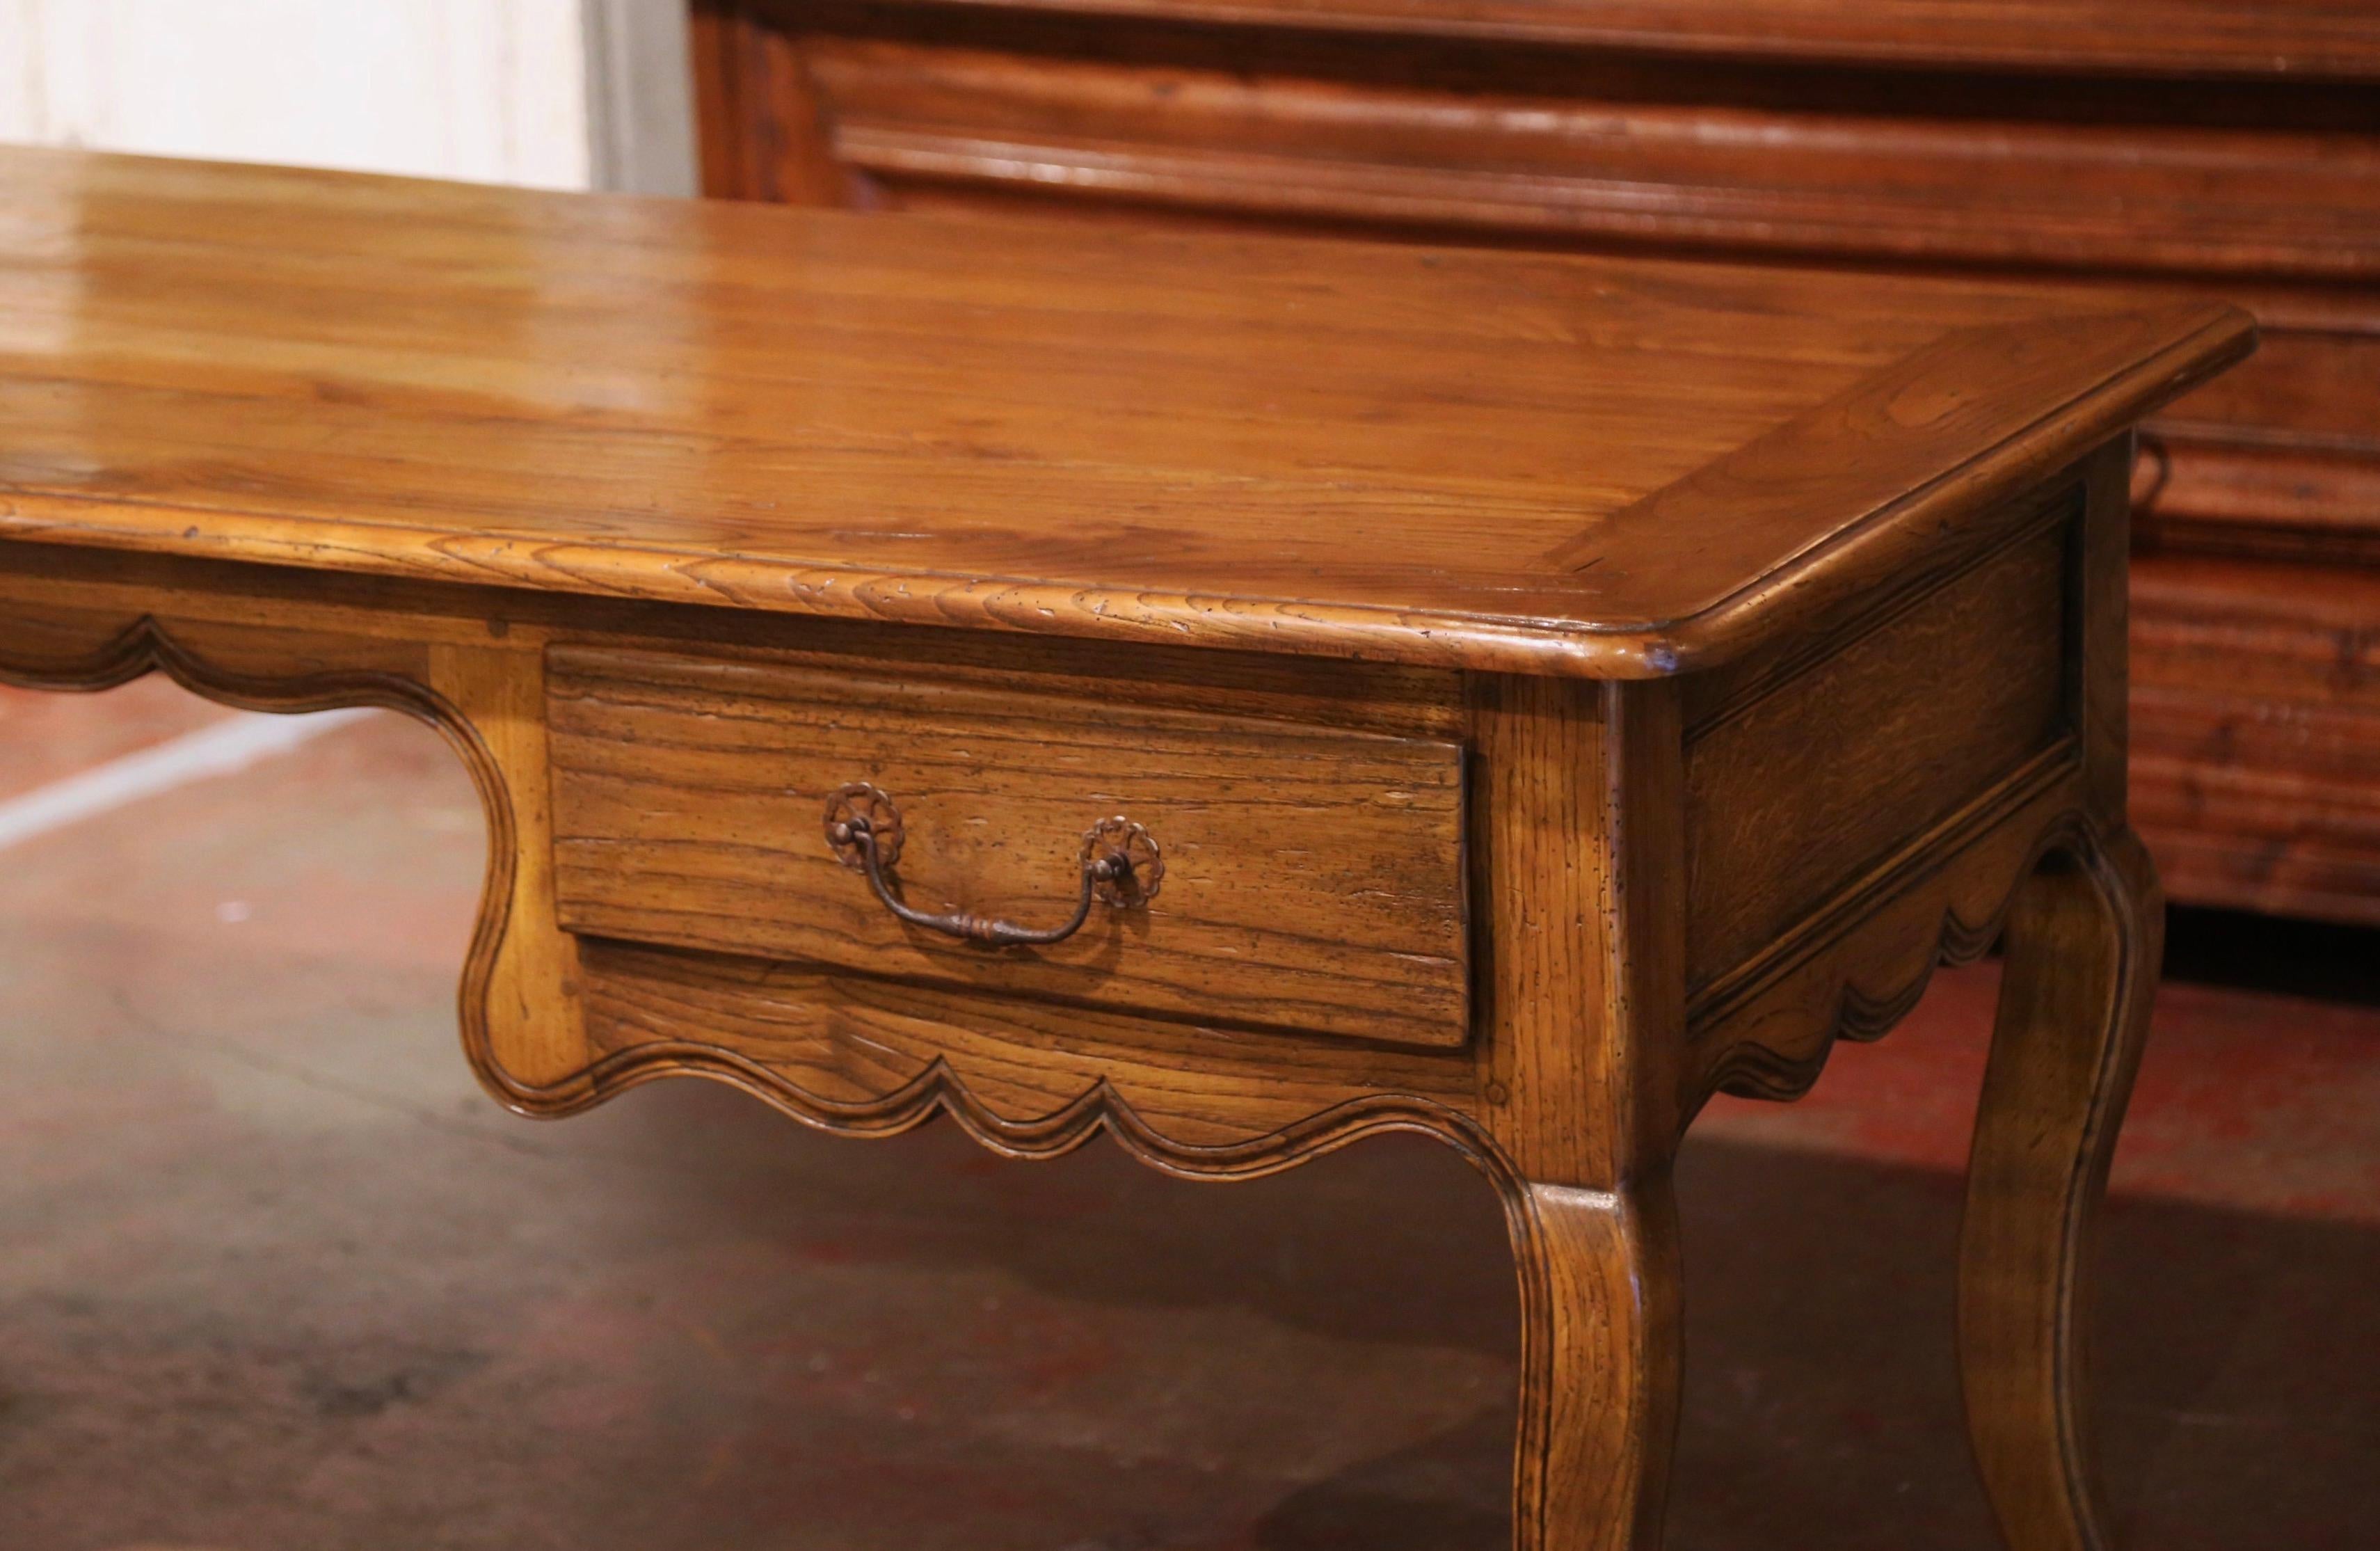 This elegant antique fruit wood desk was created in the Poitou region of France, circa 1880. Made of chestnut timber and rectangular in shape, the writing table sits on four cabriole legs, over a scalloped apron decorated with hand carved floral and